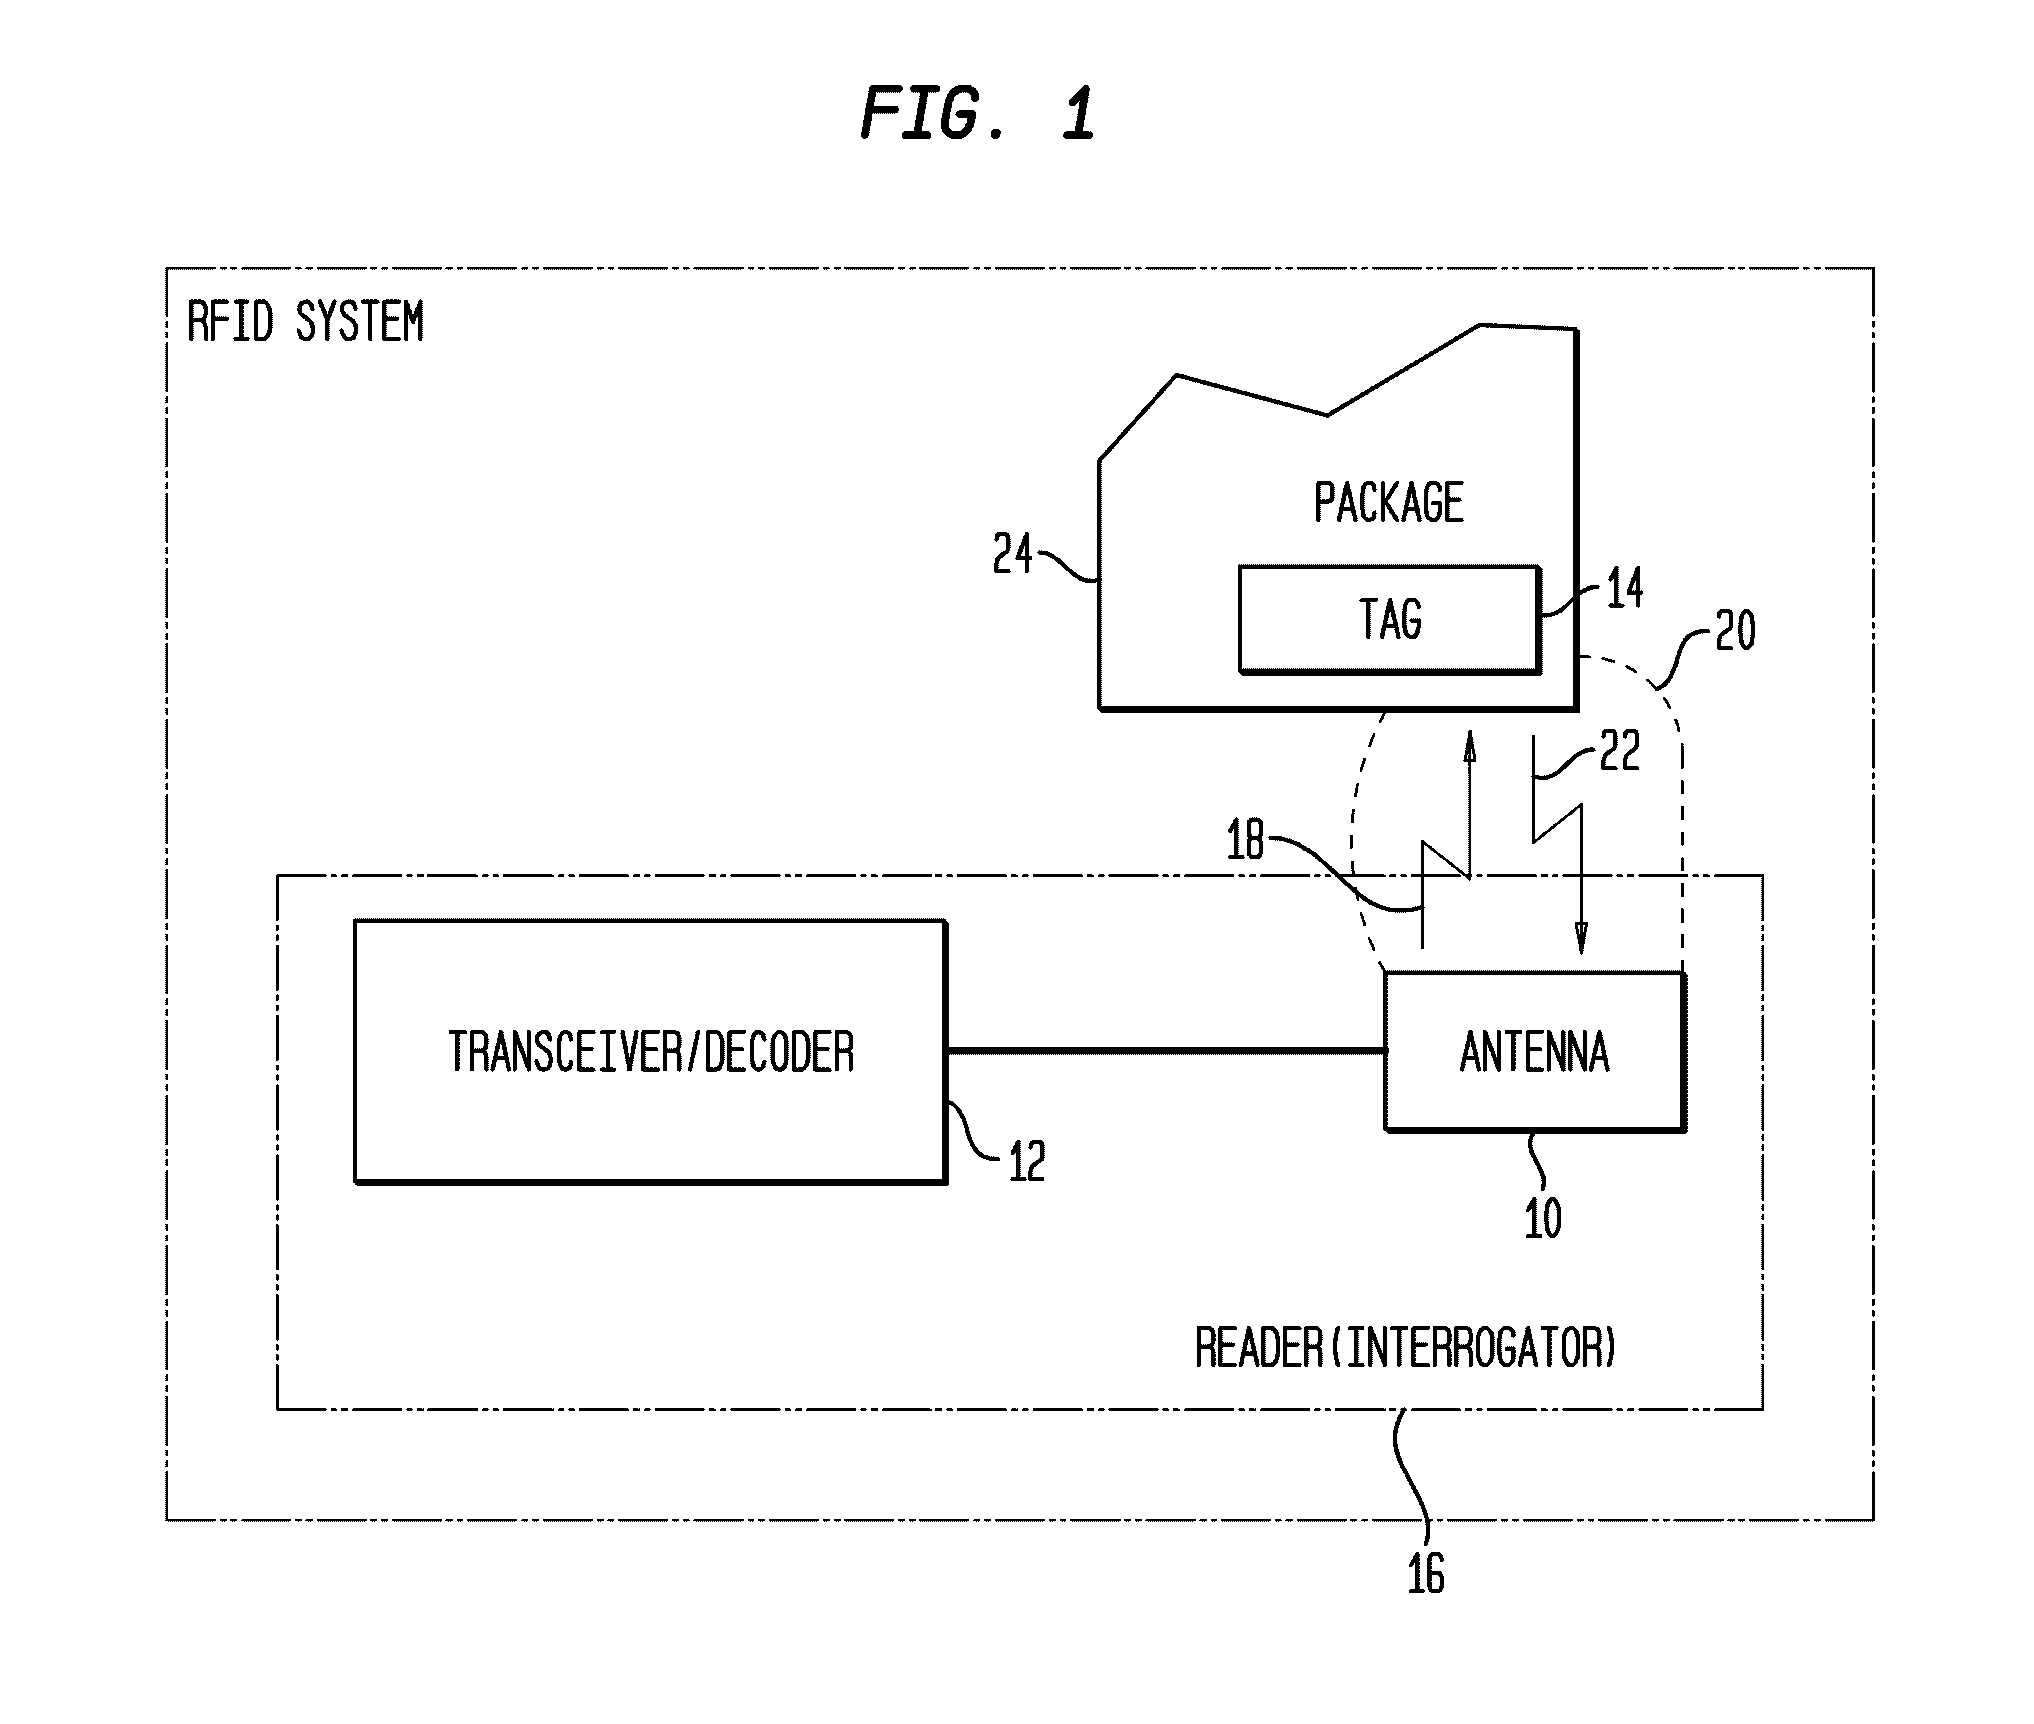 Tamper Evident Radio Frequency Identification System And Package